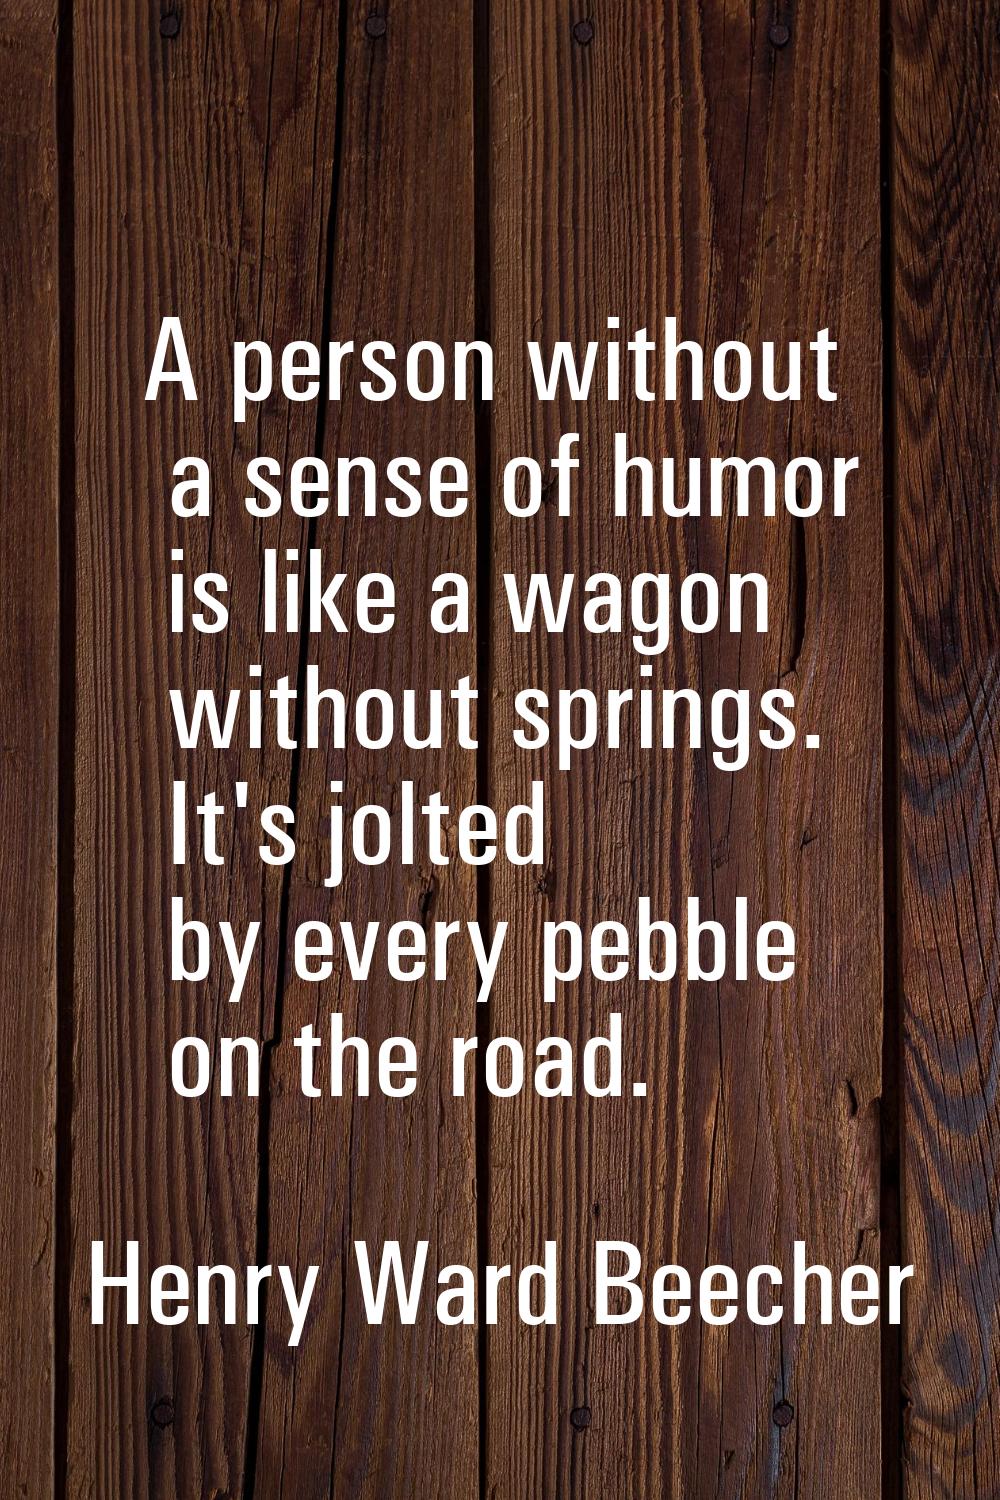 A person without a sense of humor is like a wagon without springs. It's jolted by every pebble on t